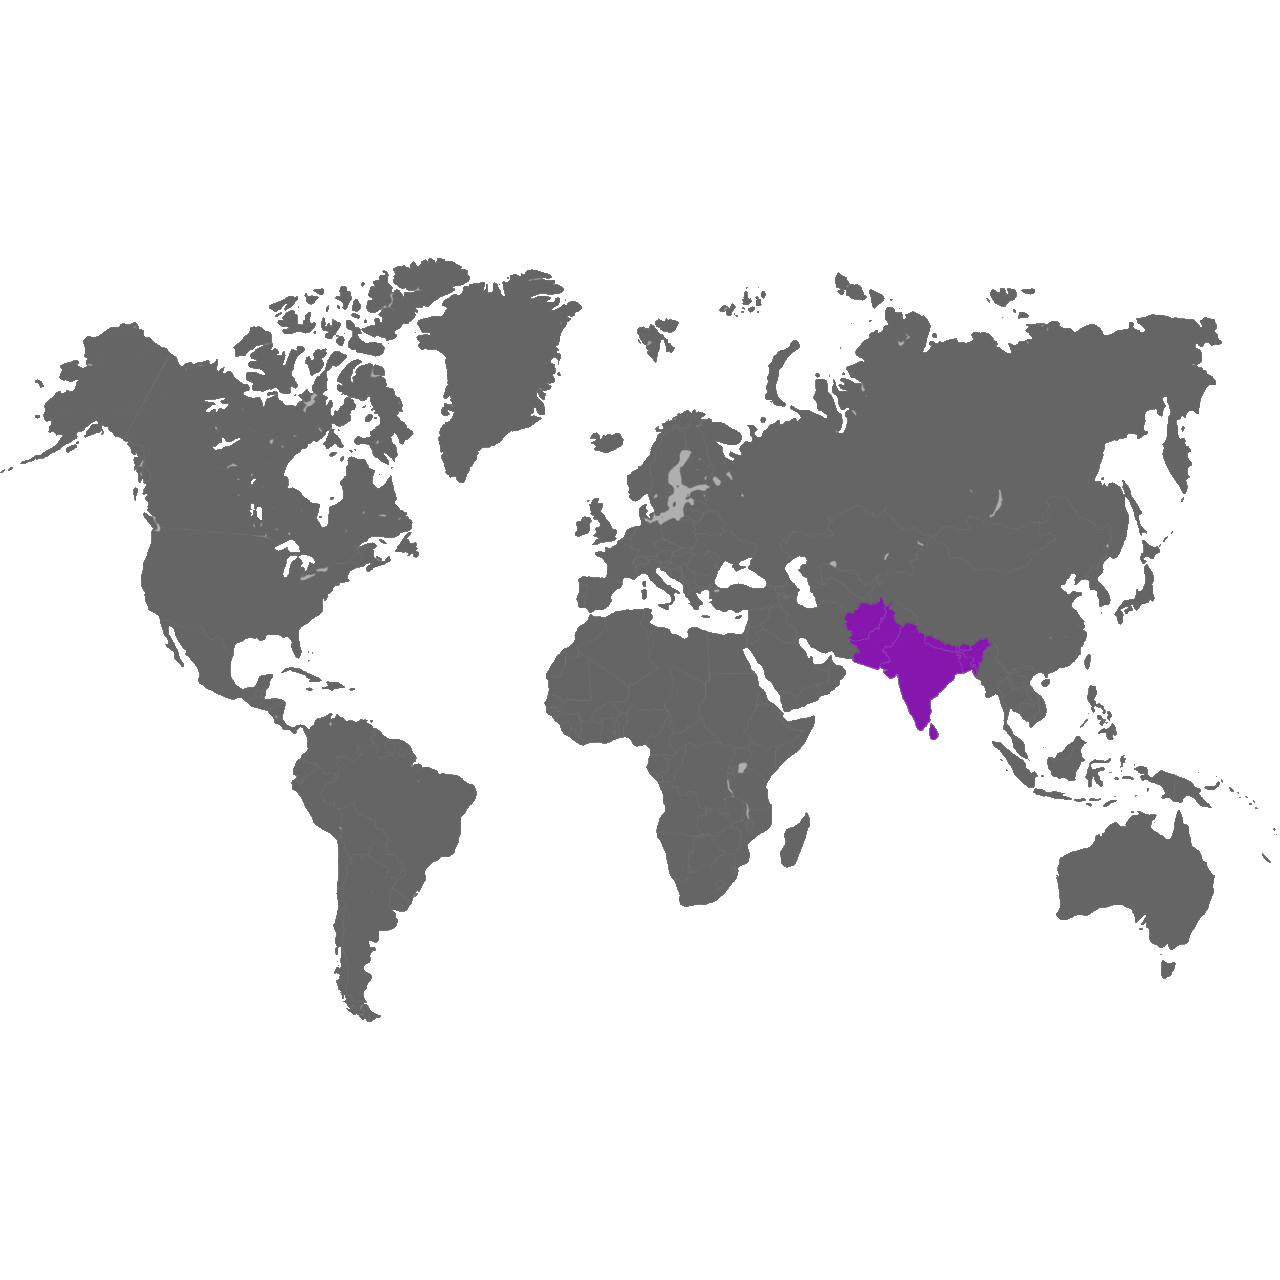 Map Image of South Asia Region for i4T Global Licence Holders